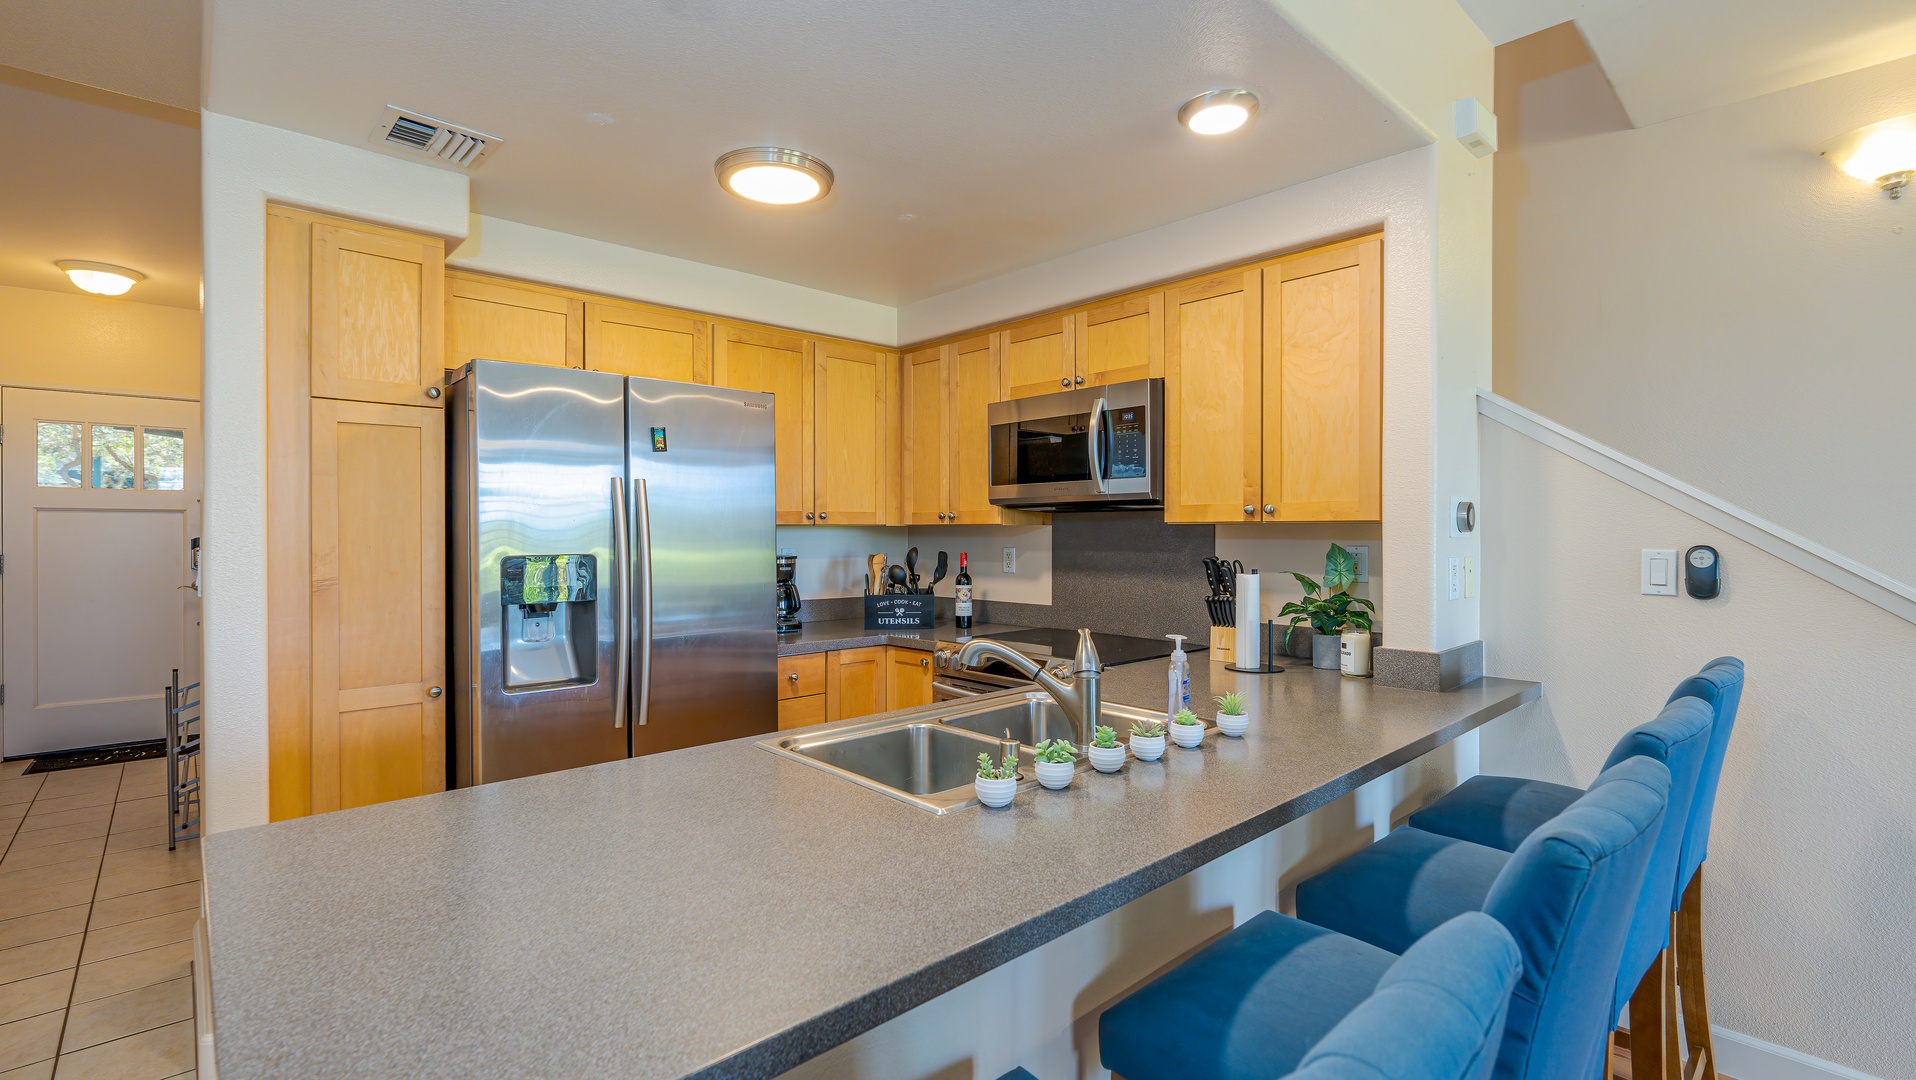 Kapolei Vacation Rentals, Hillside Villas 1496-2 - The bright kitchen features many amenities including stainless steel appliances and bar seating.